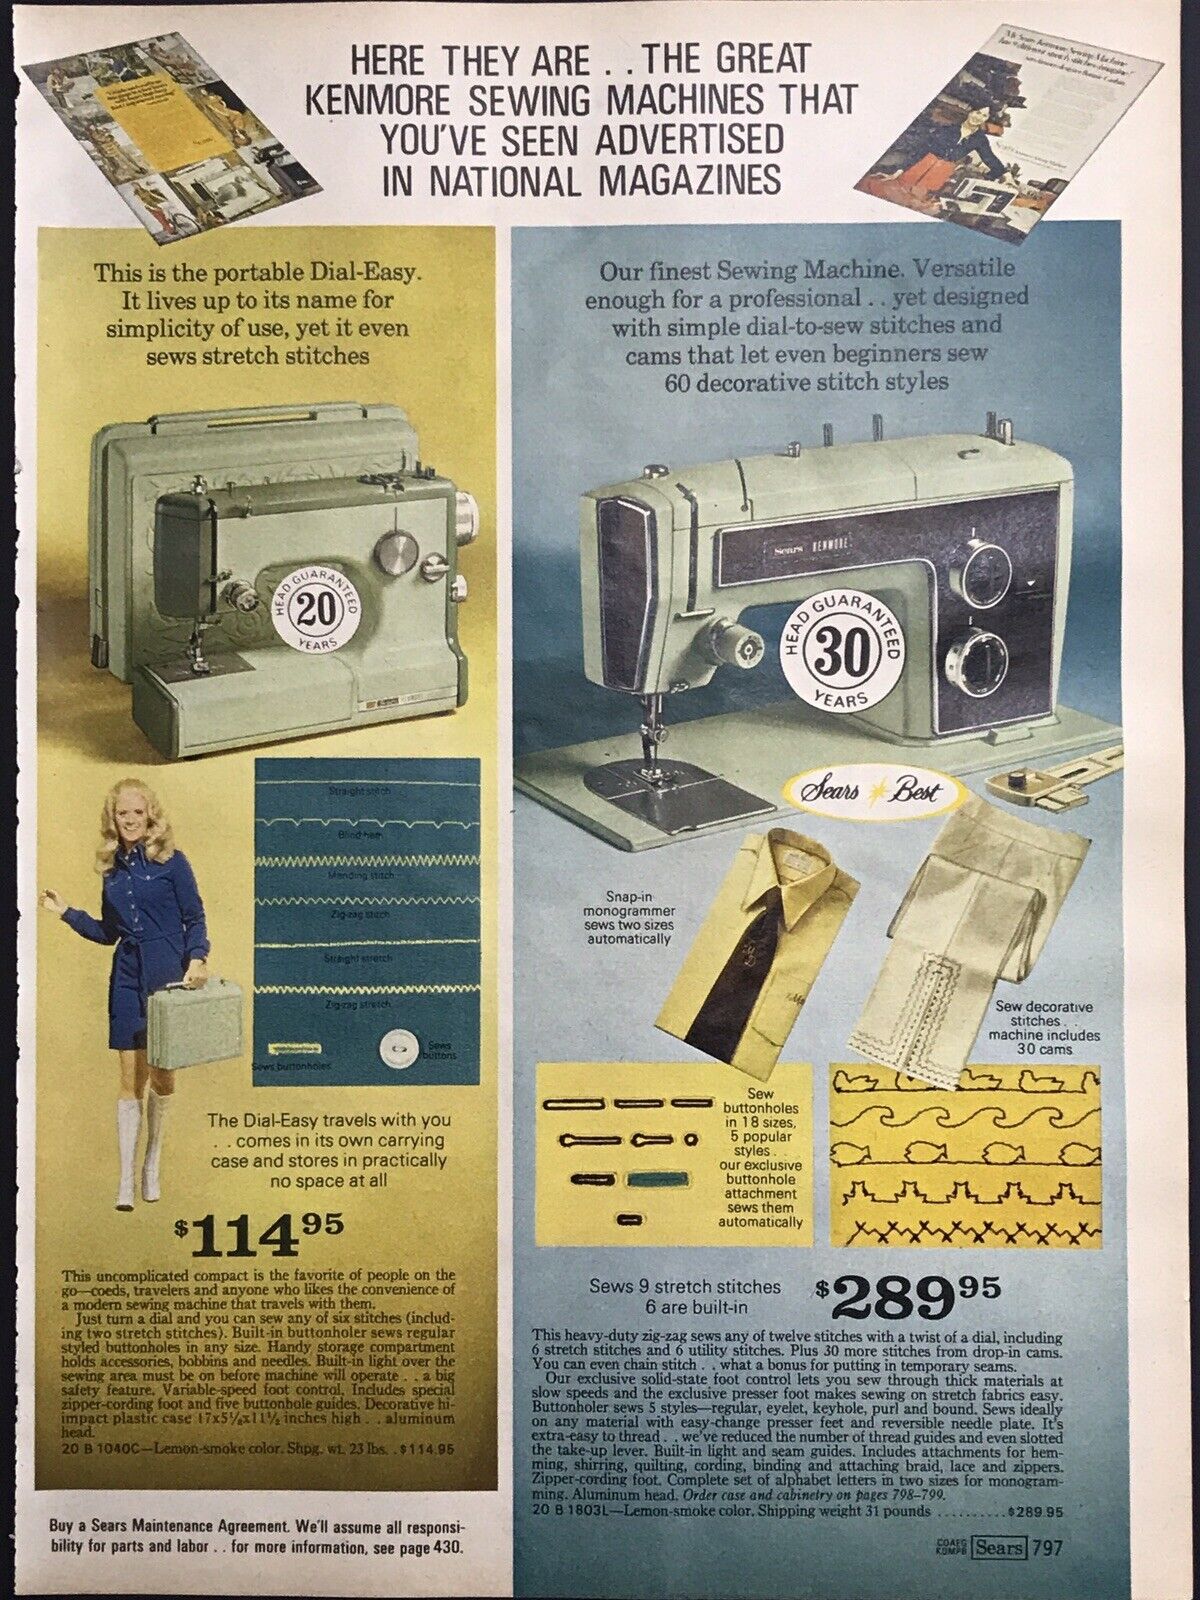 Vintage 1973 KENMORE Sears Electric Sewing Machines Print Ad 8x11” SRC 797